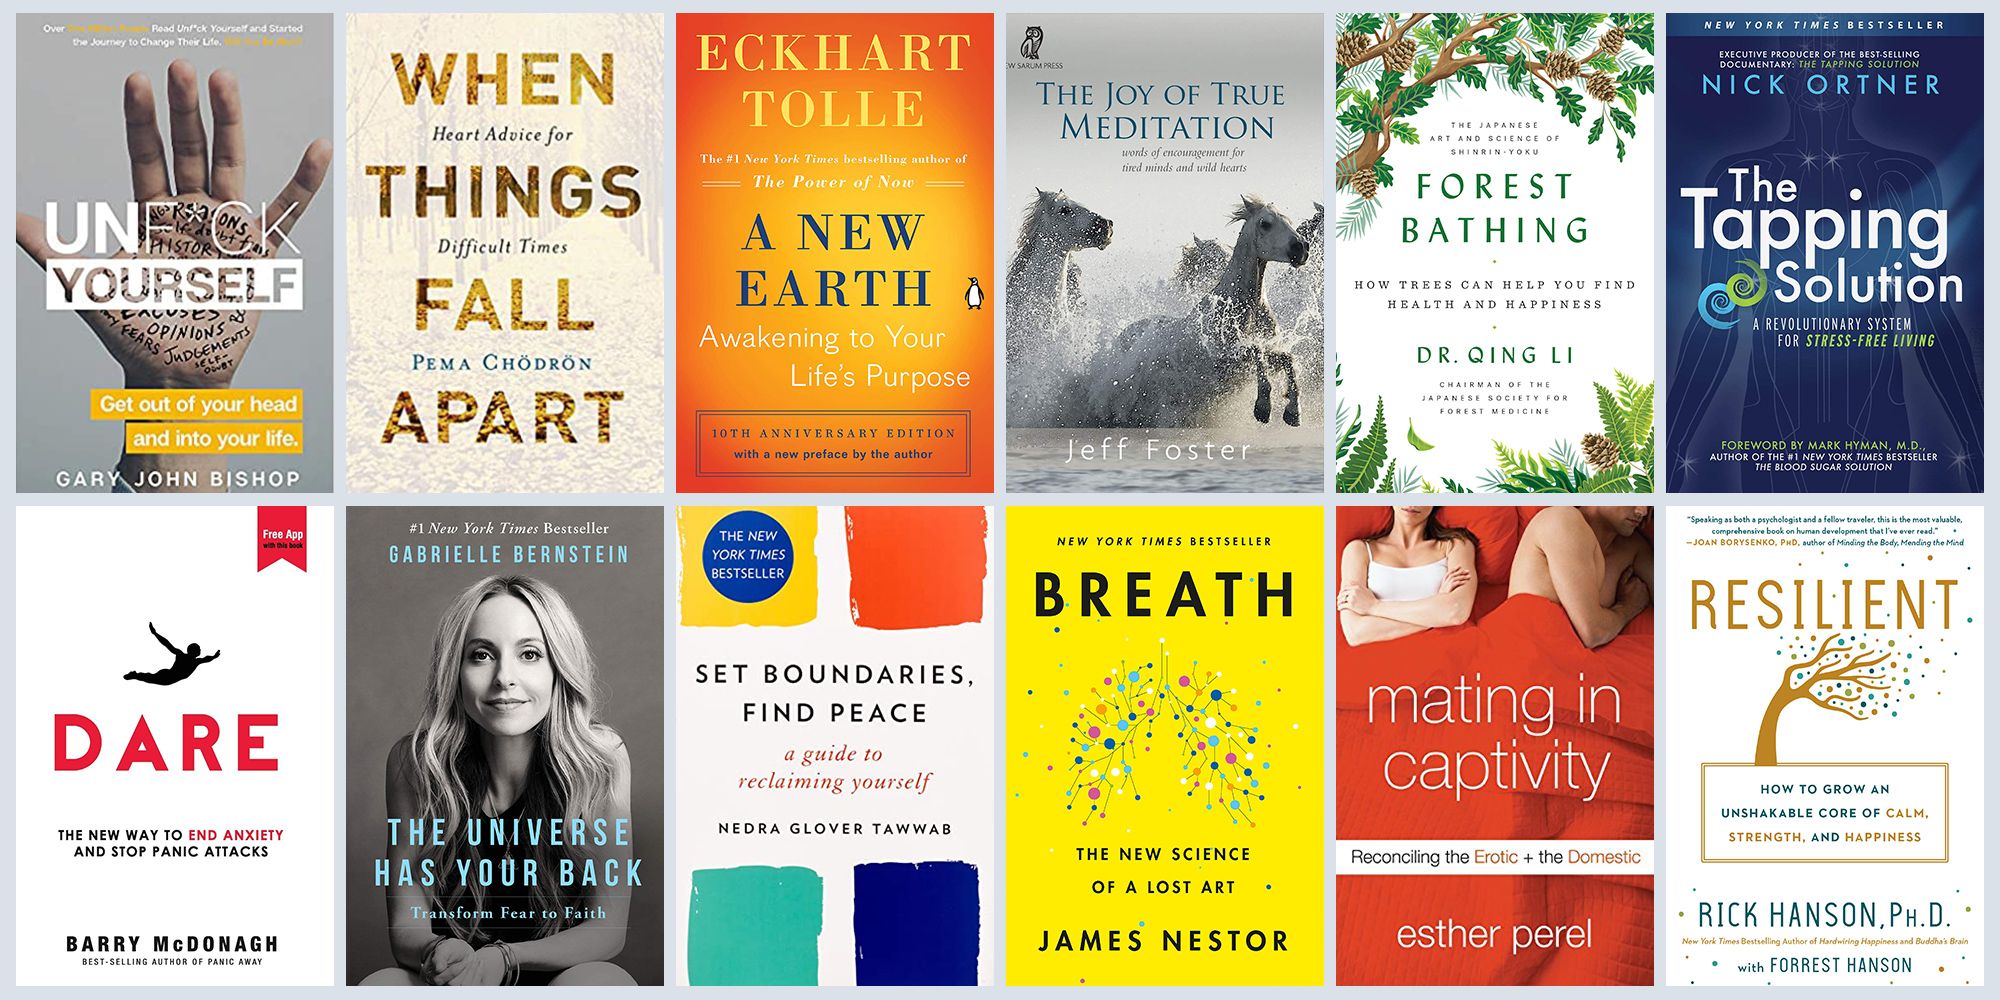 20 Best Mindfulness Books to Find Your Inner Peace  Mindfulness books,  Books to read, Books for self improvement